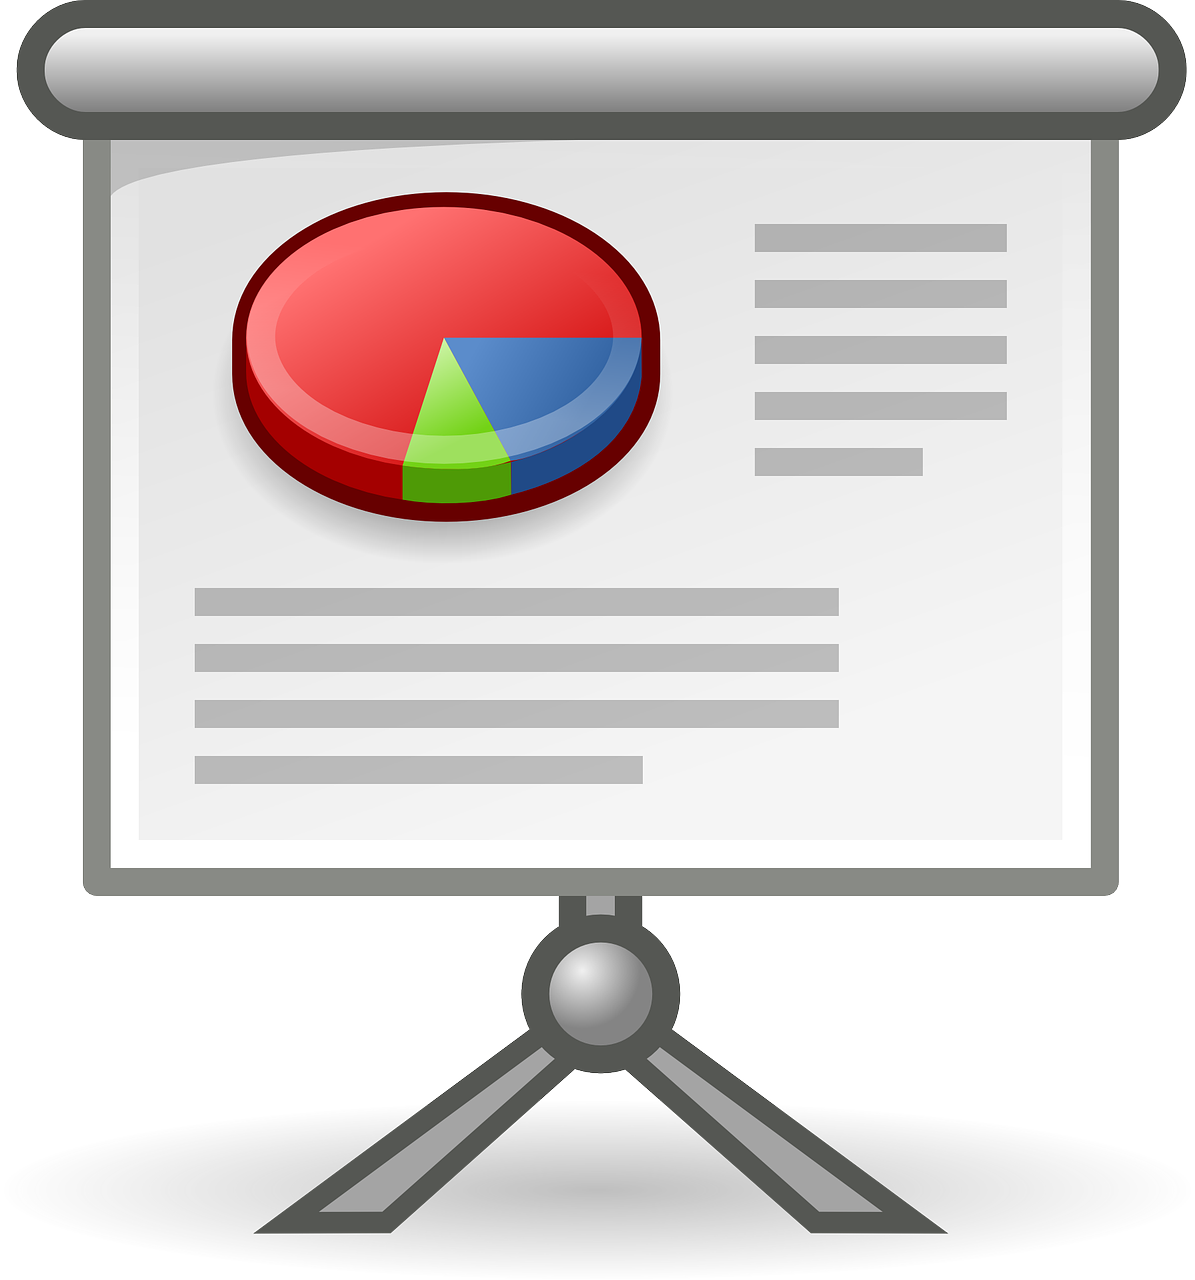 Cartoon image of a screen with a colorful pie chart in the upper left corner and lines representing text to the right and below to look like a Power Point Presentation.